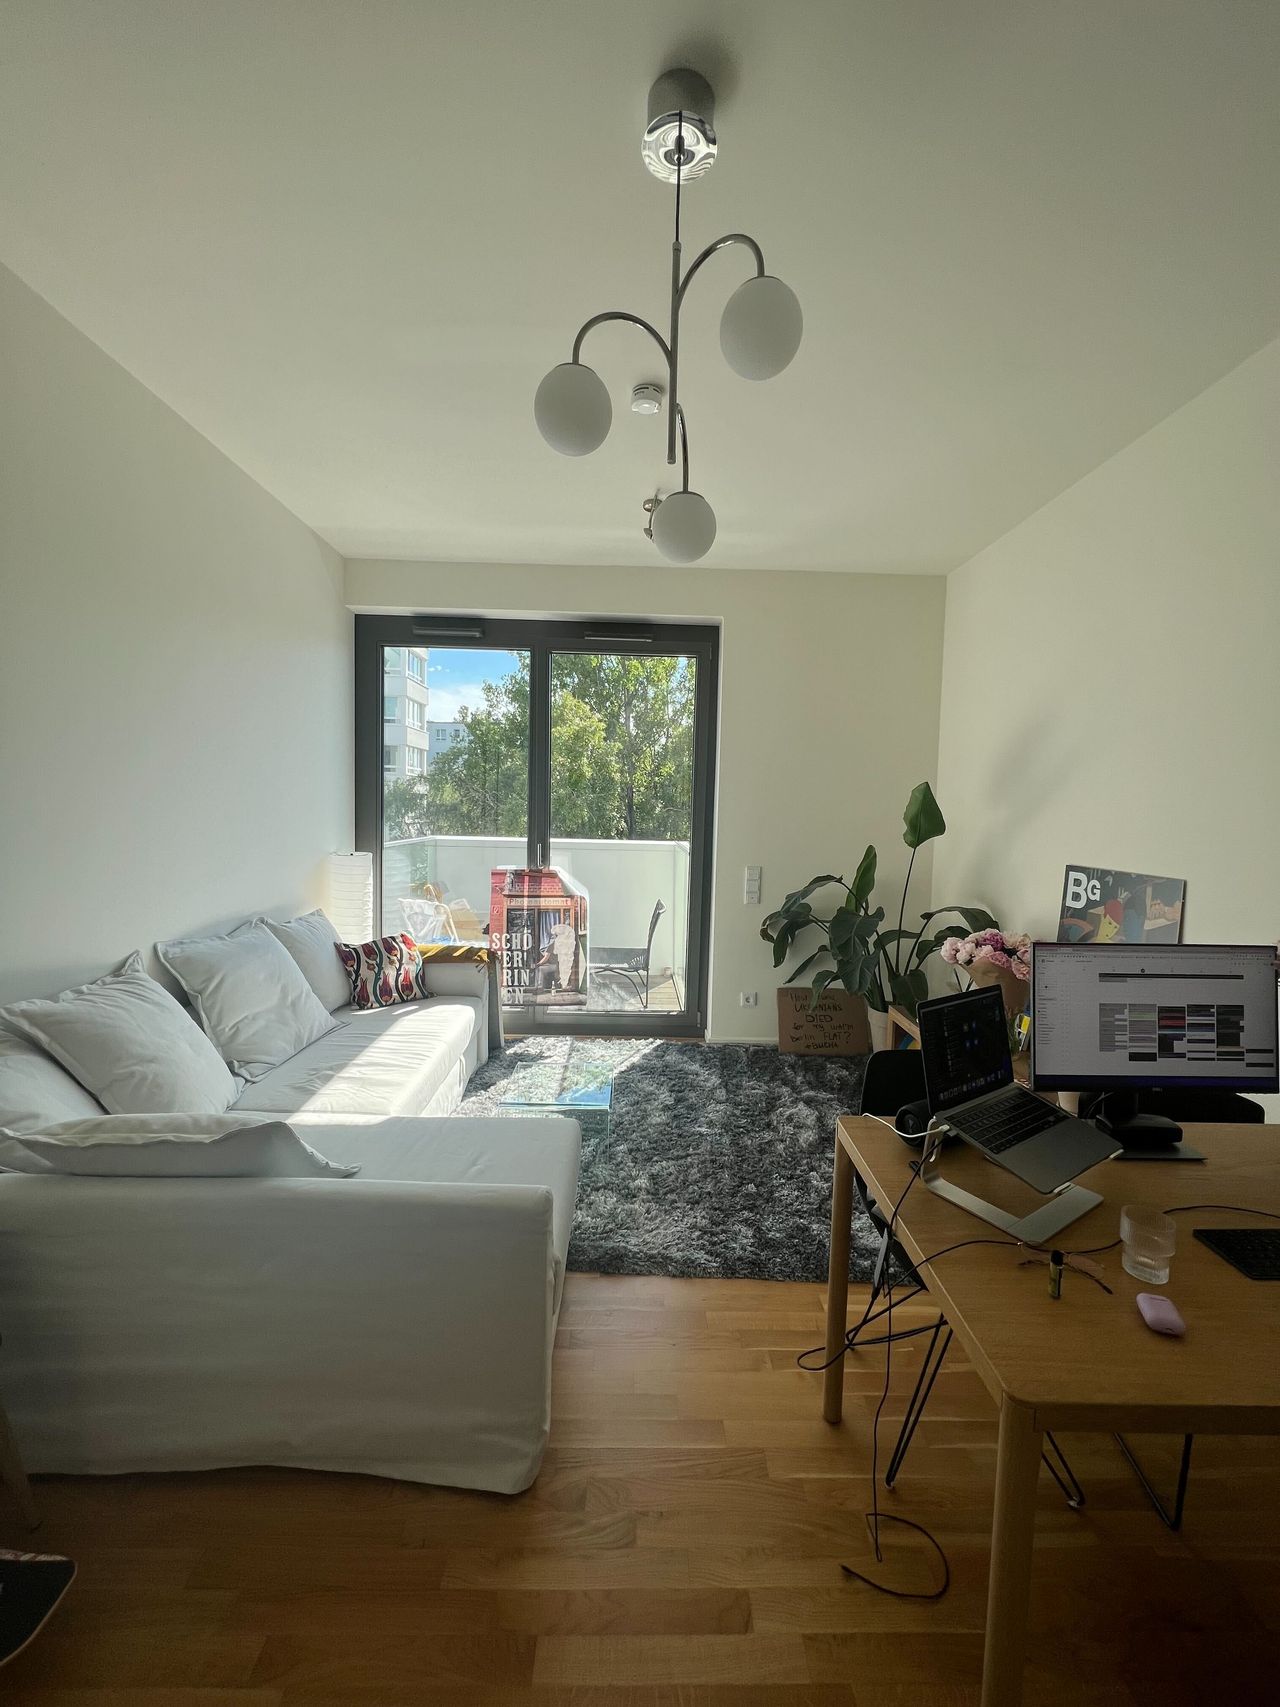 Sunny, fully furnished flat in Mitte, ready for you from July 3rd